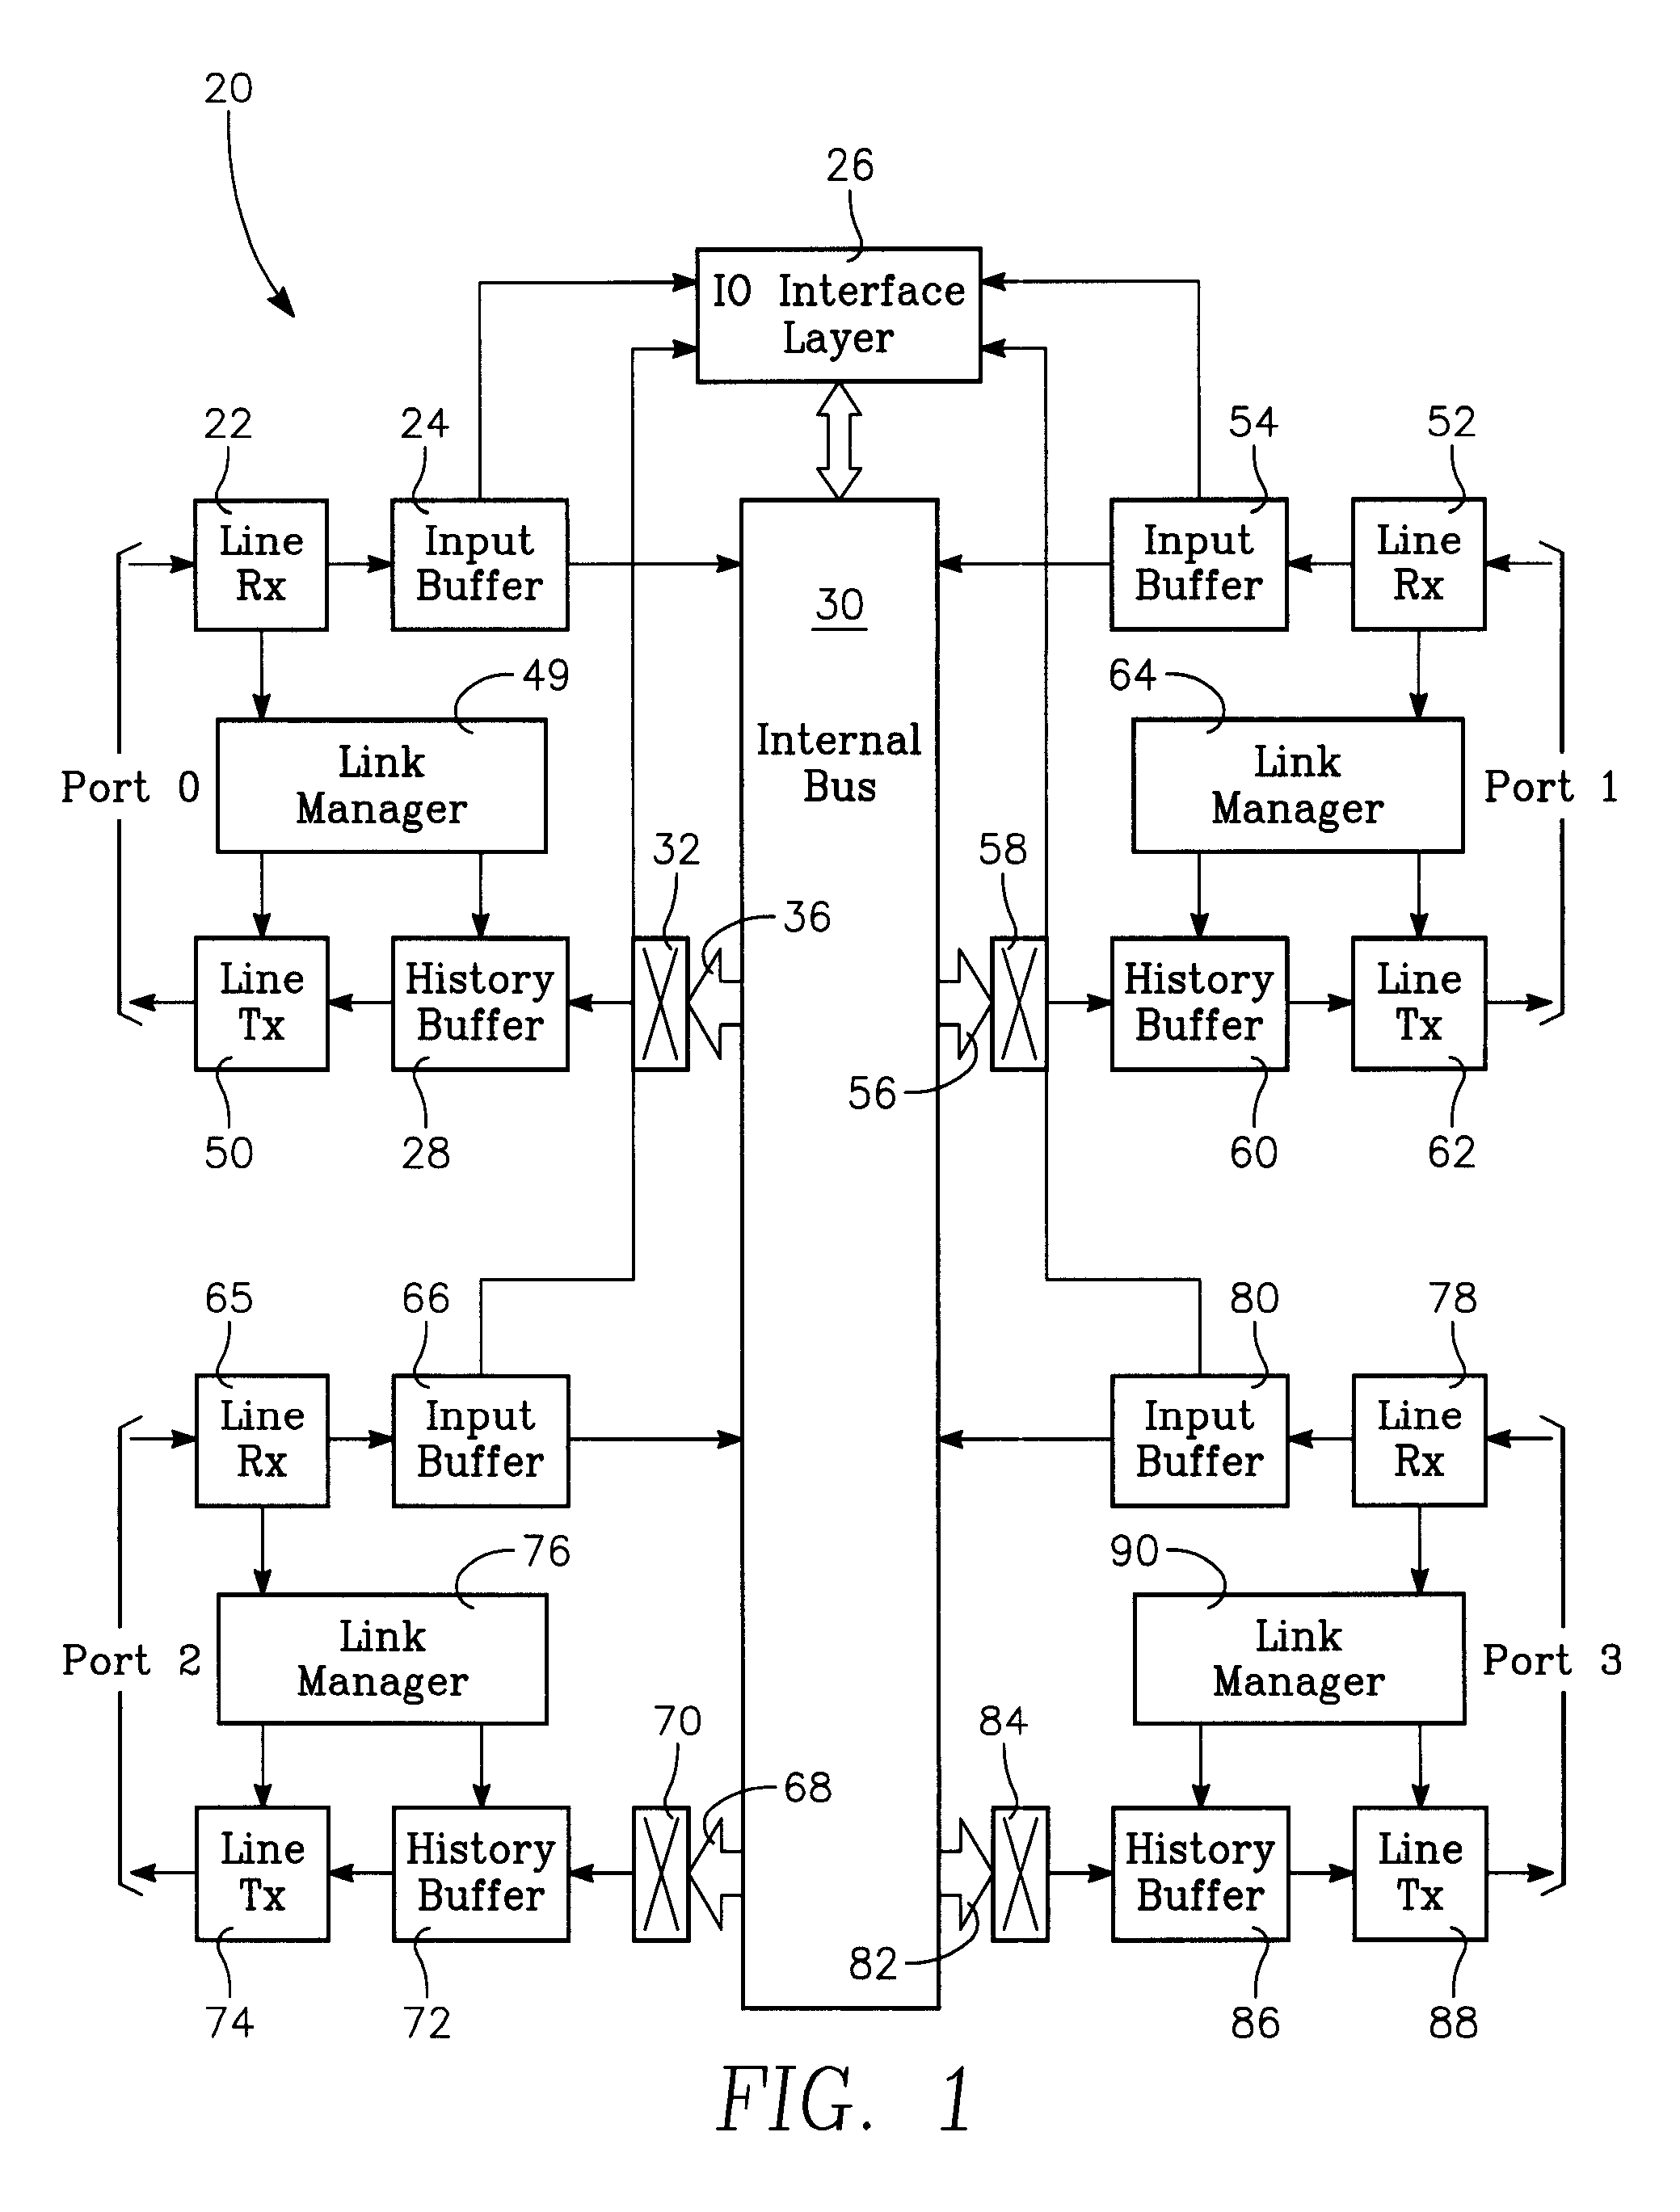 Low latency switch architecture for high-performance packet-switched networks